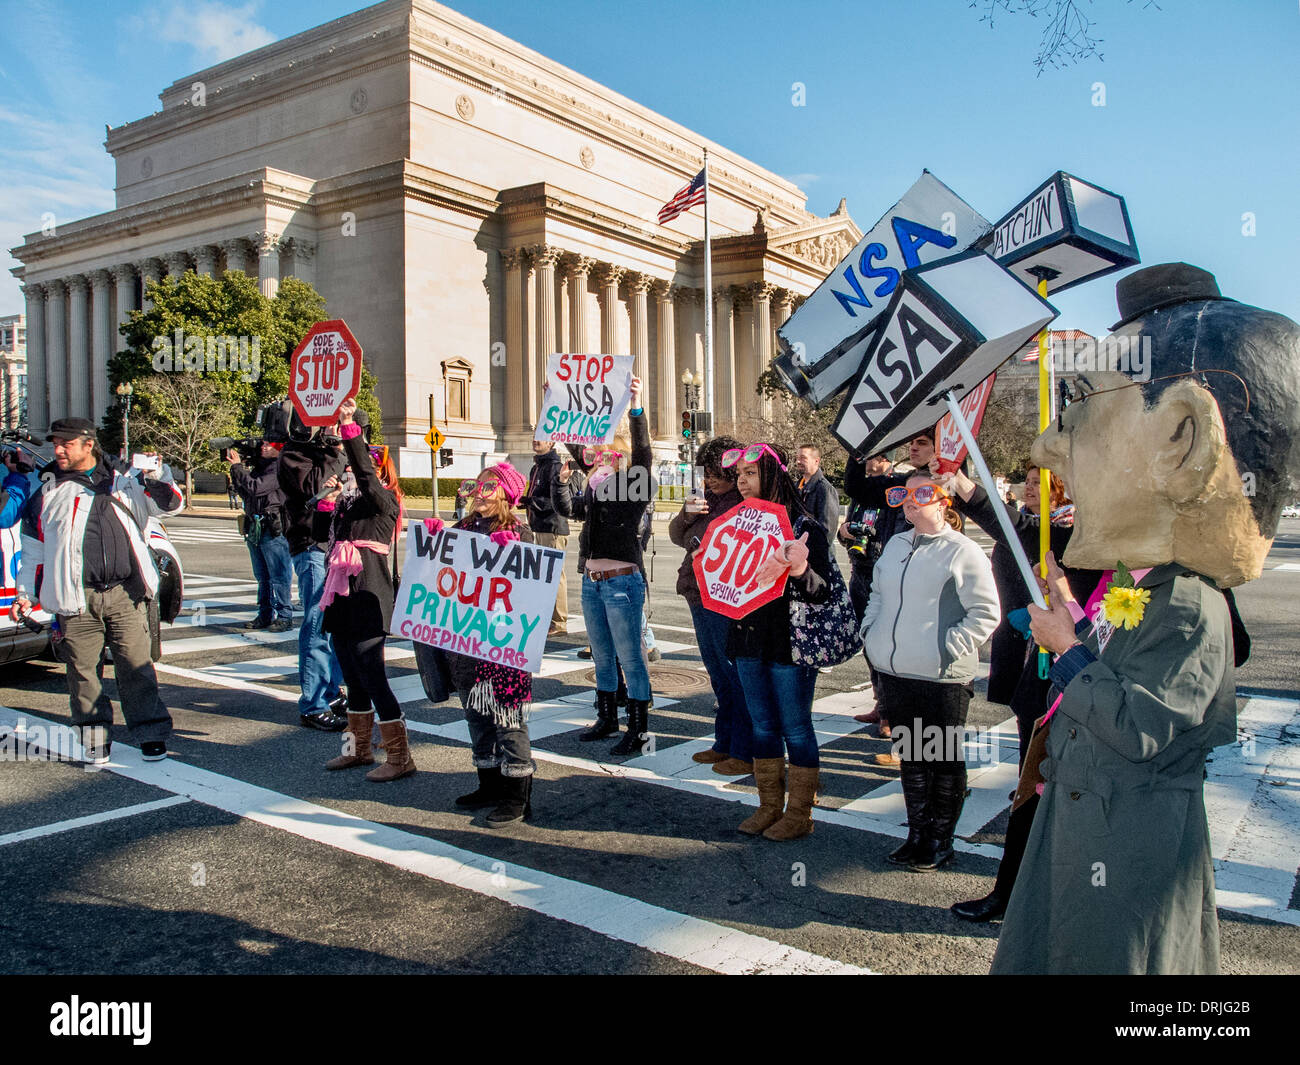 Protesters gather on Constitution Avenue in Washington, D.C. to protest government monitoring of personal telephone calls. Stock Photo